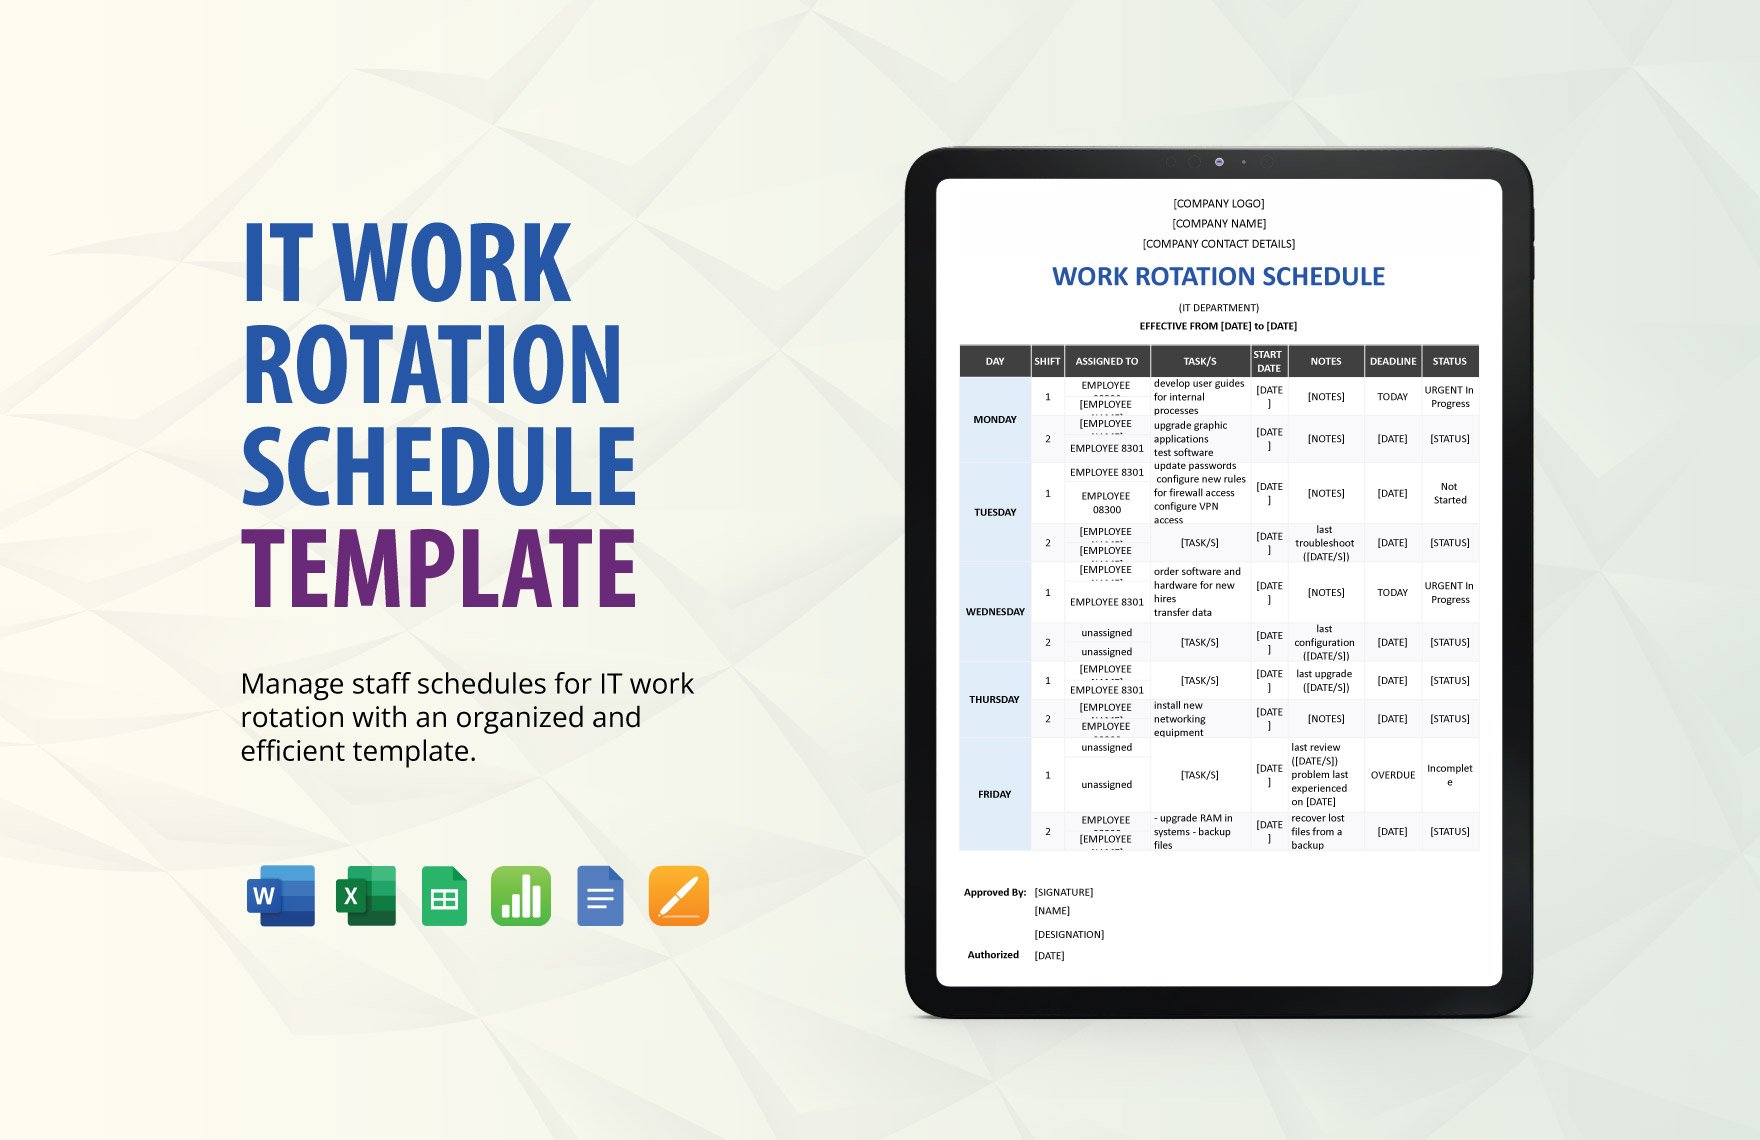 IT Work Rotation Schedule Template